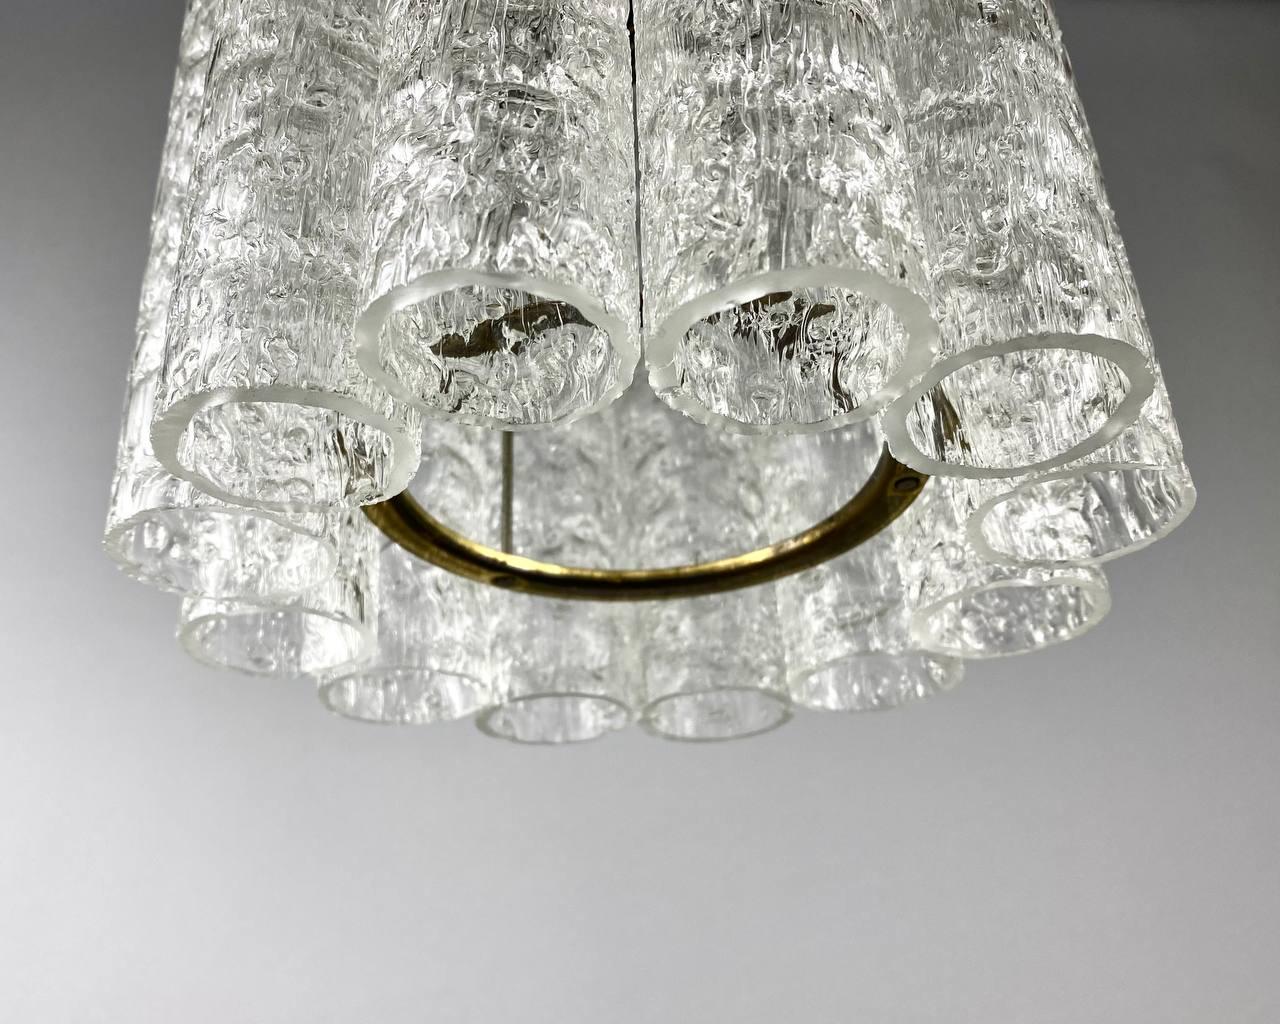 Mid-20th Century Vintage Murano Glass Pendant Lamp by Doria Leuchten, Germany For Sale